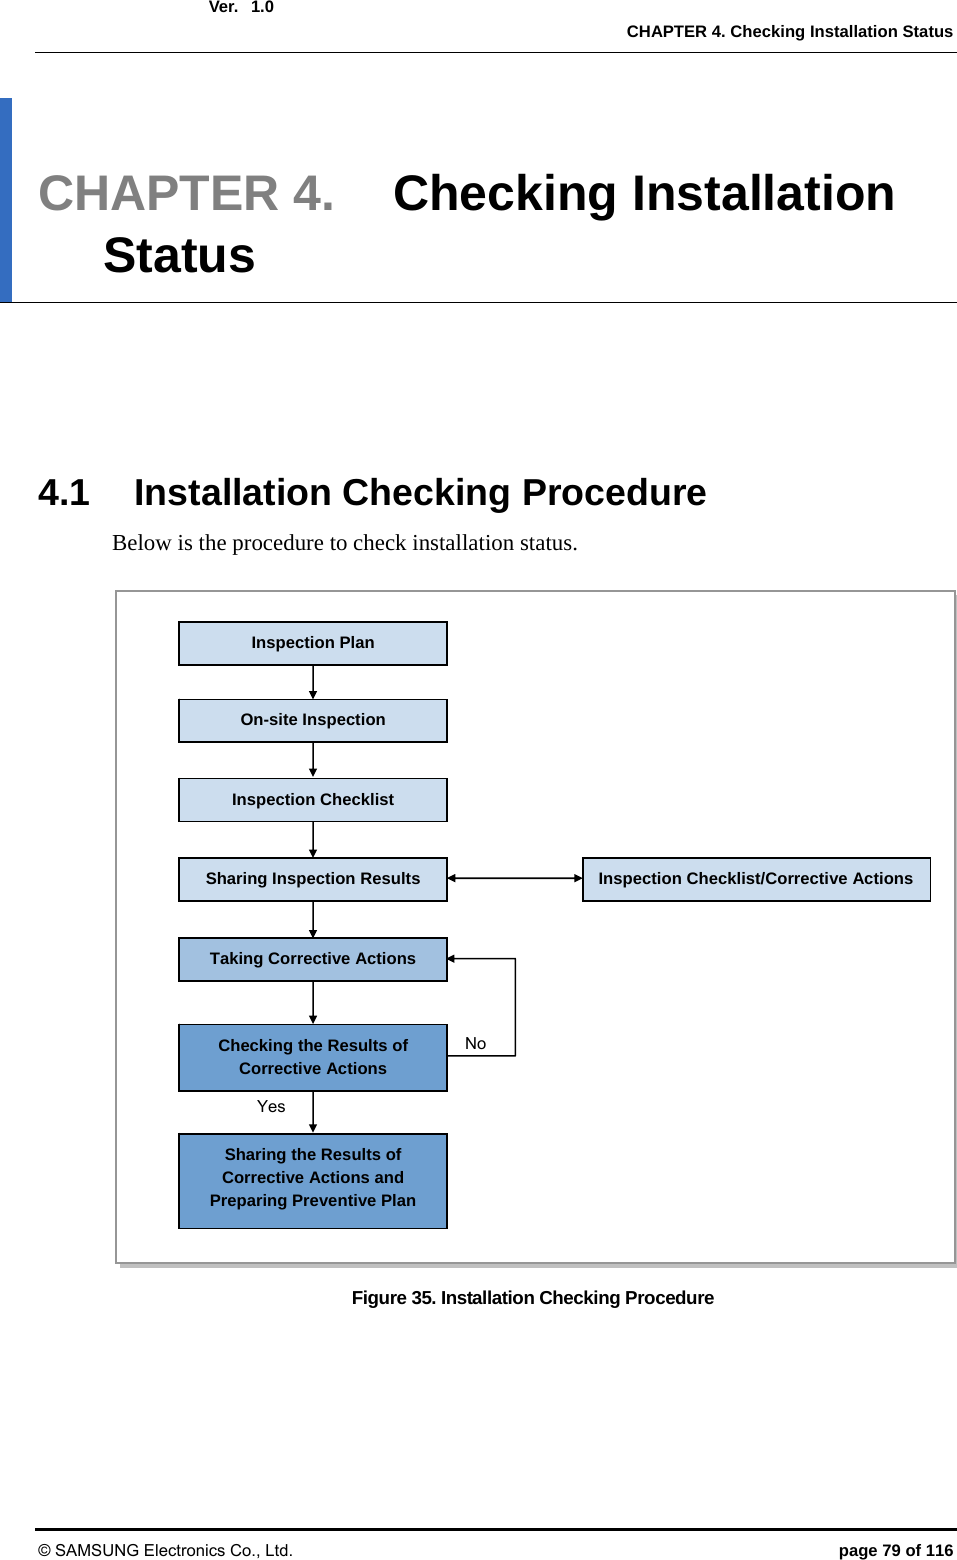  Ver.  CHAPTER 4. Checking Installation Status © SAMSUNG Electronics Co., Ltd.  page 79 of 116 1.0 CHAPTER 4.  Checking Installation Status      4.1  Installation Checking Procedure Below is the procedure to check installation status.  Figure 35. Installation Checking Procedure  NoYes Sharing Inspection Results Taking Corrective Actions Checking the Results of Corrective Actions On-site Inspection Inspection Checklist Inspection Checklist/Corrective ActionsSharing the Results of Corrective Actions and Preparing Preventive Plan Inspection Plan 